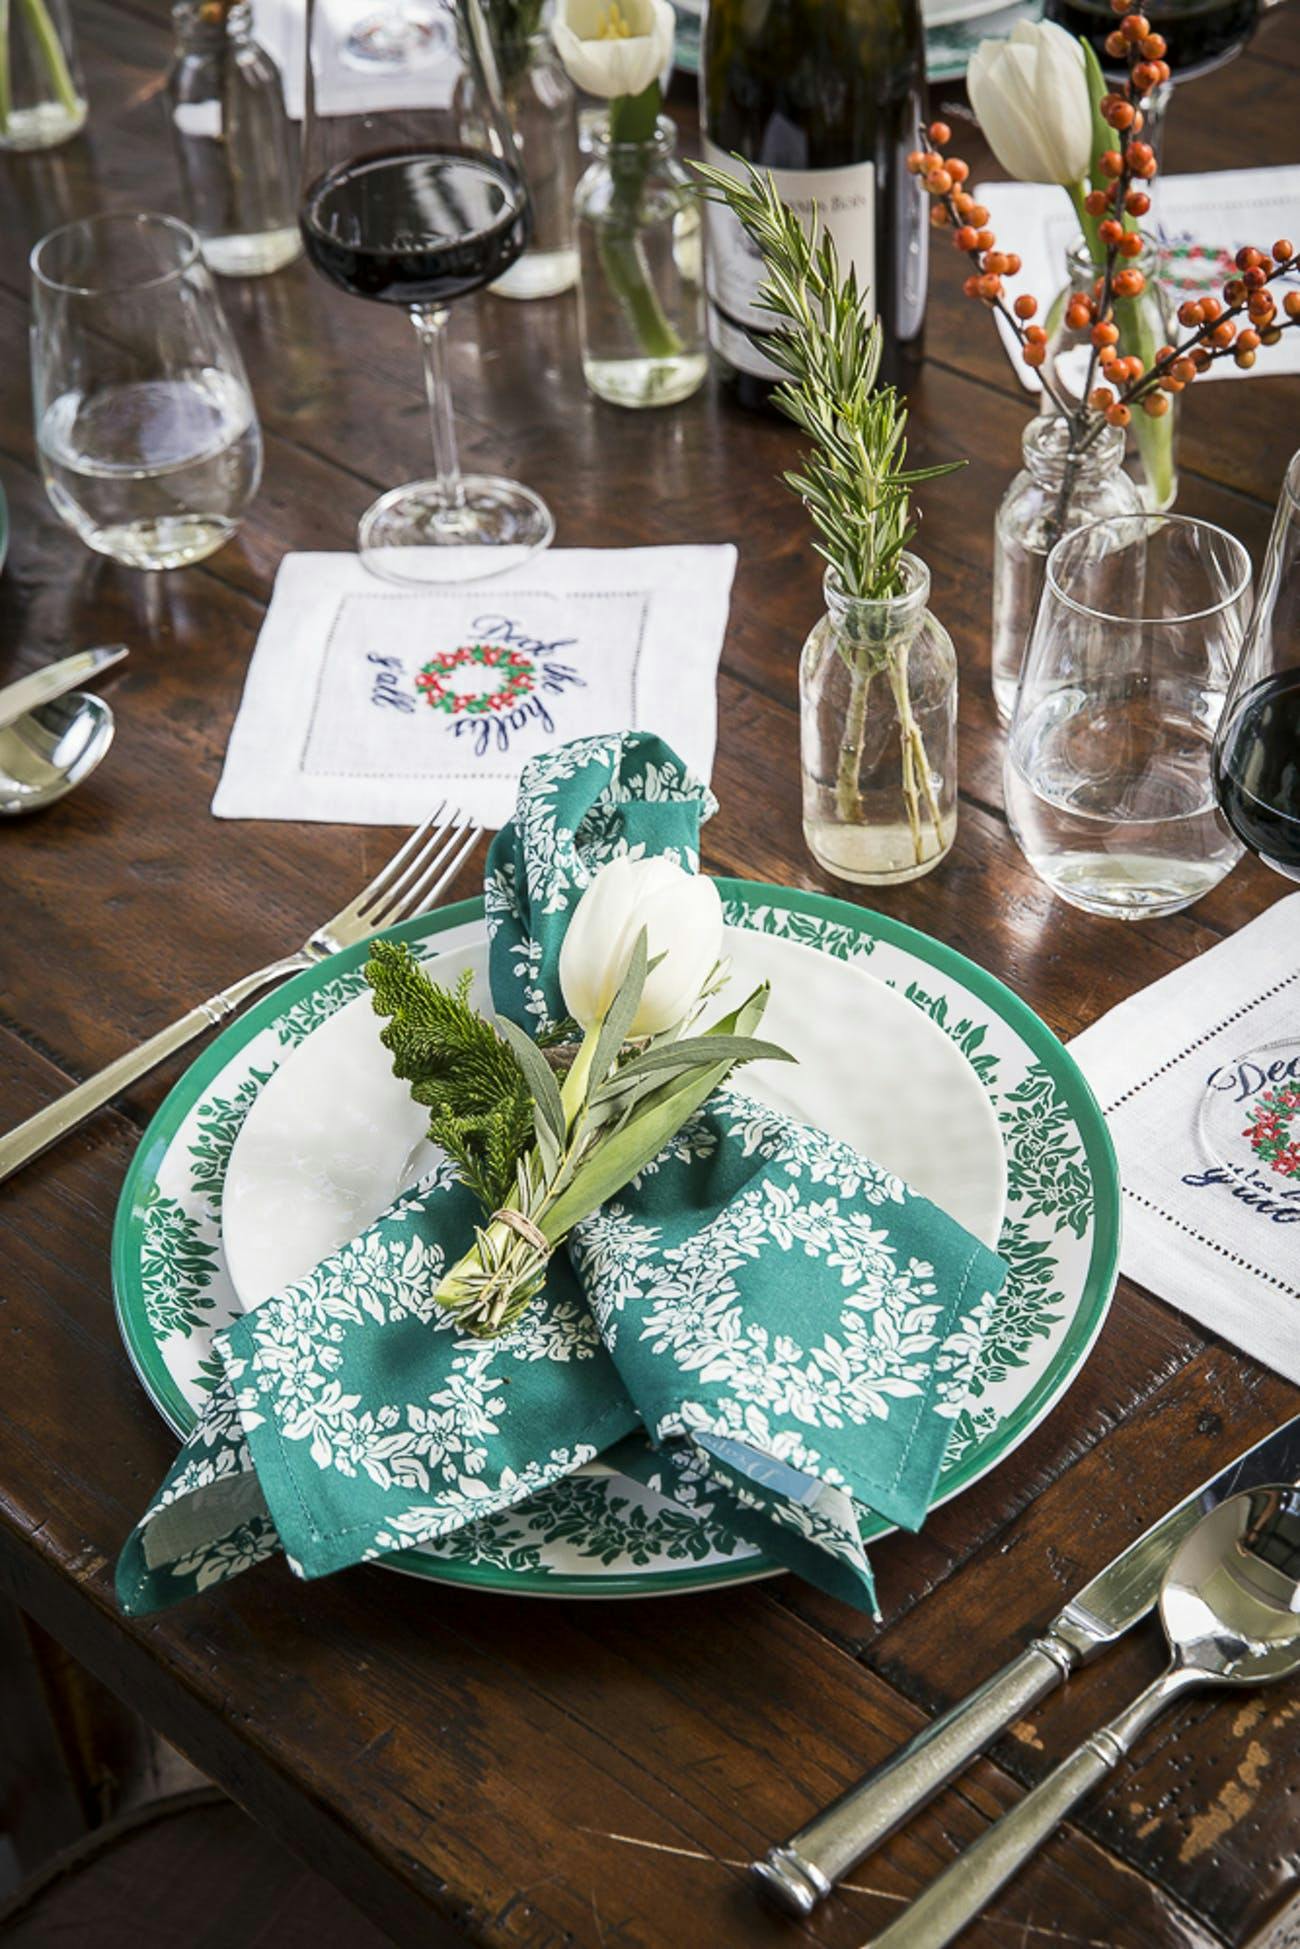 White Plate with Blue and Green Designs and a White Flower